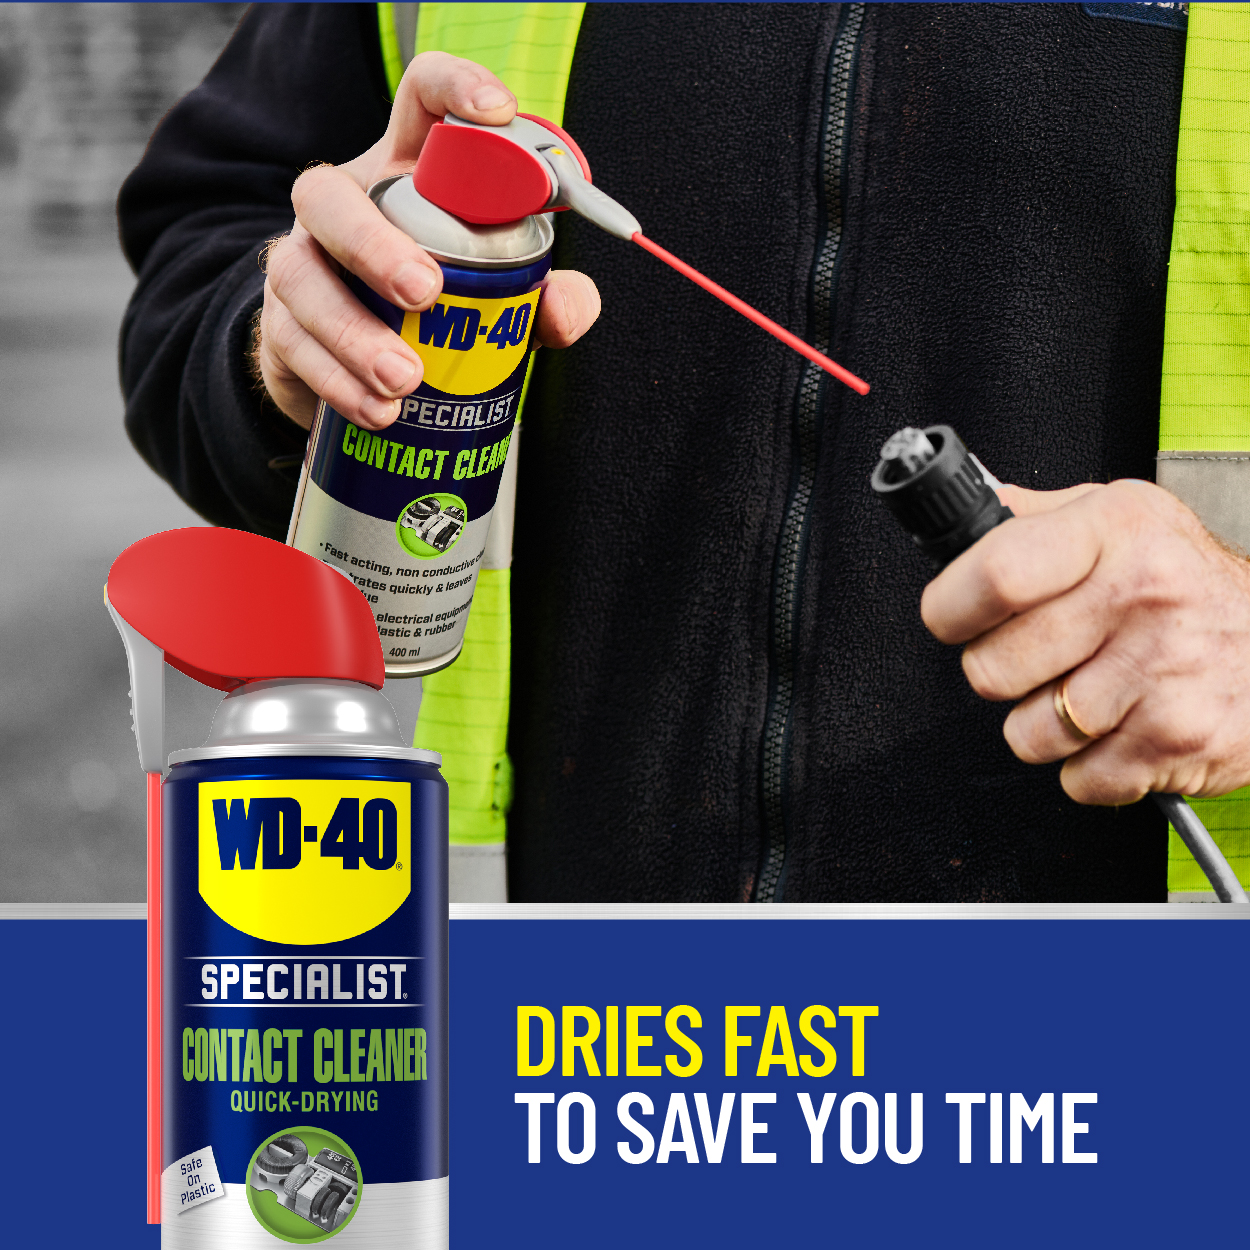 WD-40 Specialist Electrical Contact Cleaner, 11 oz - image 4 of 8